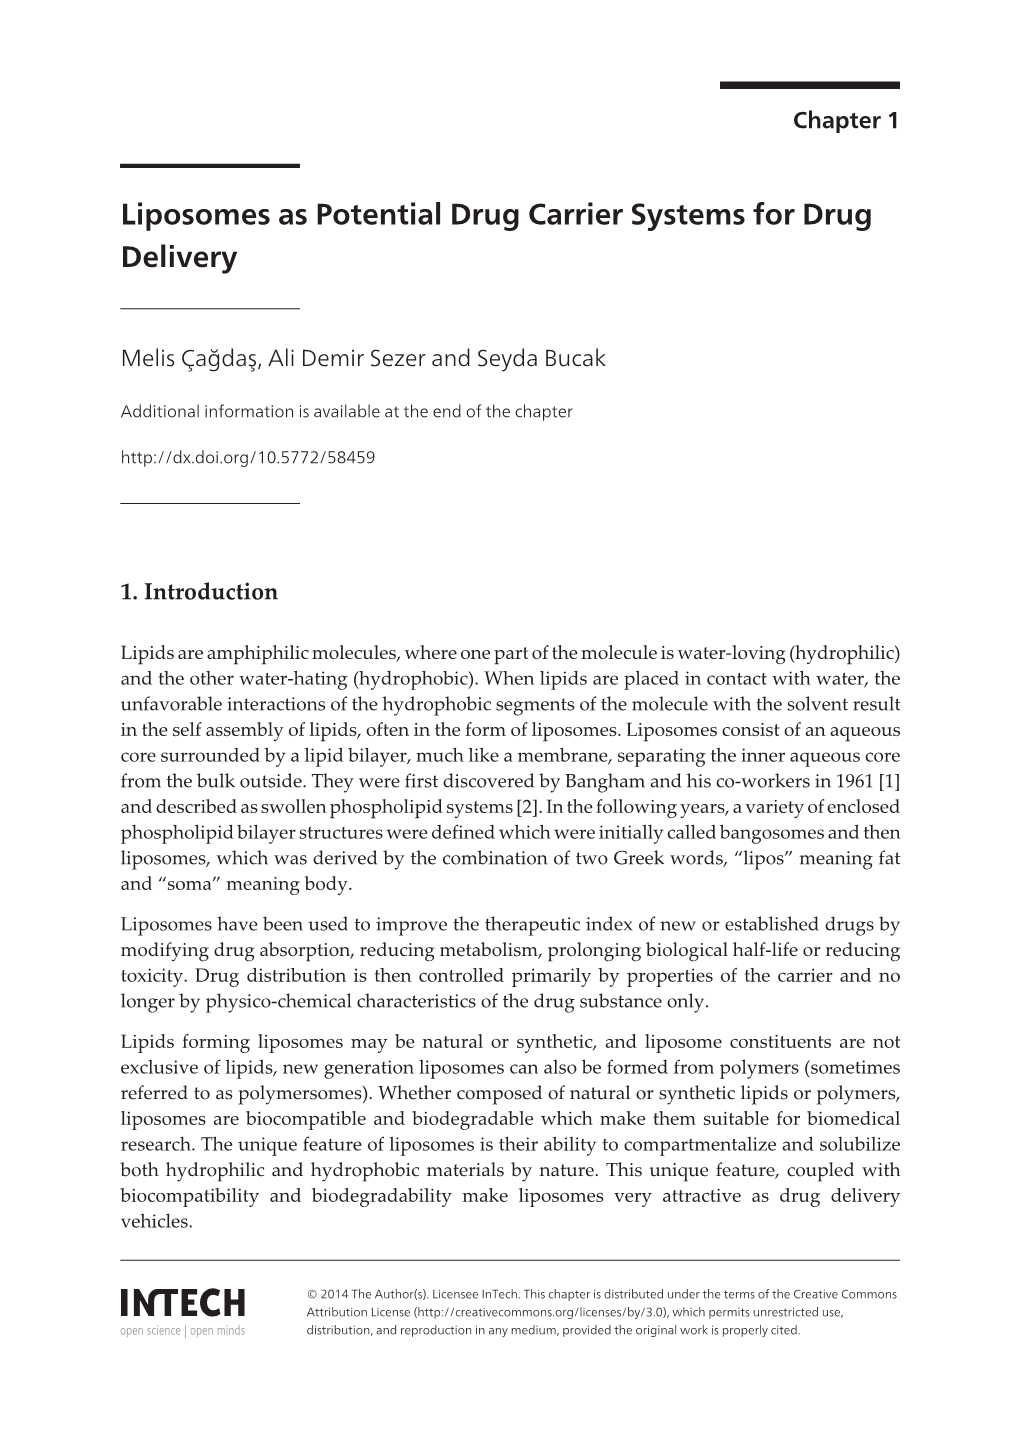 Liposomes As Potential Drug Carrier Systems for Drug Delivery